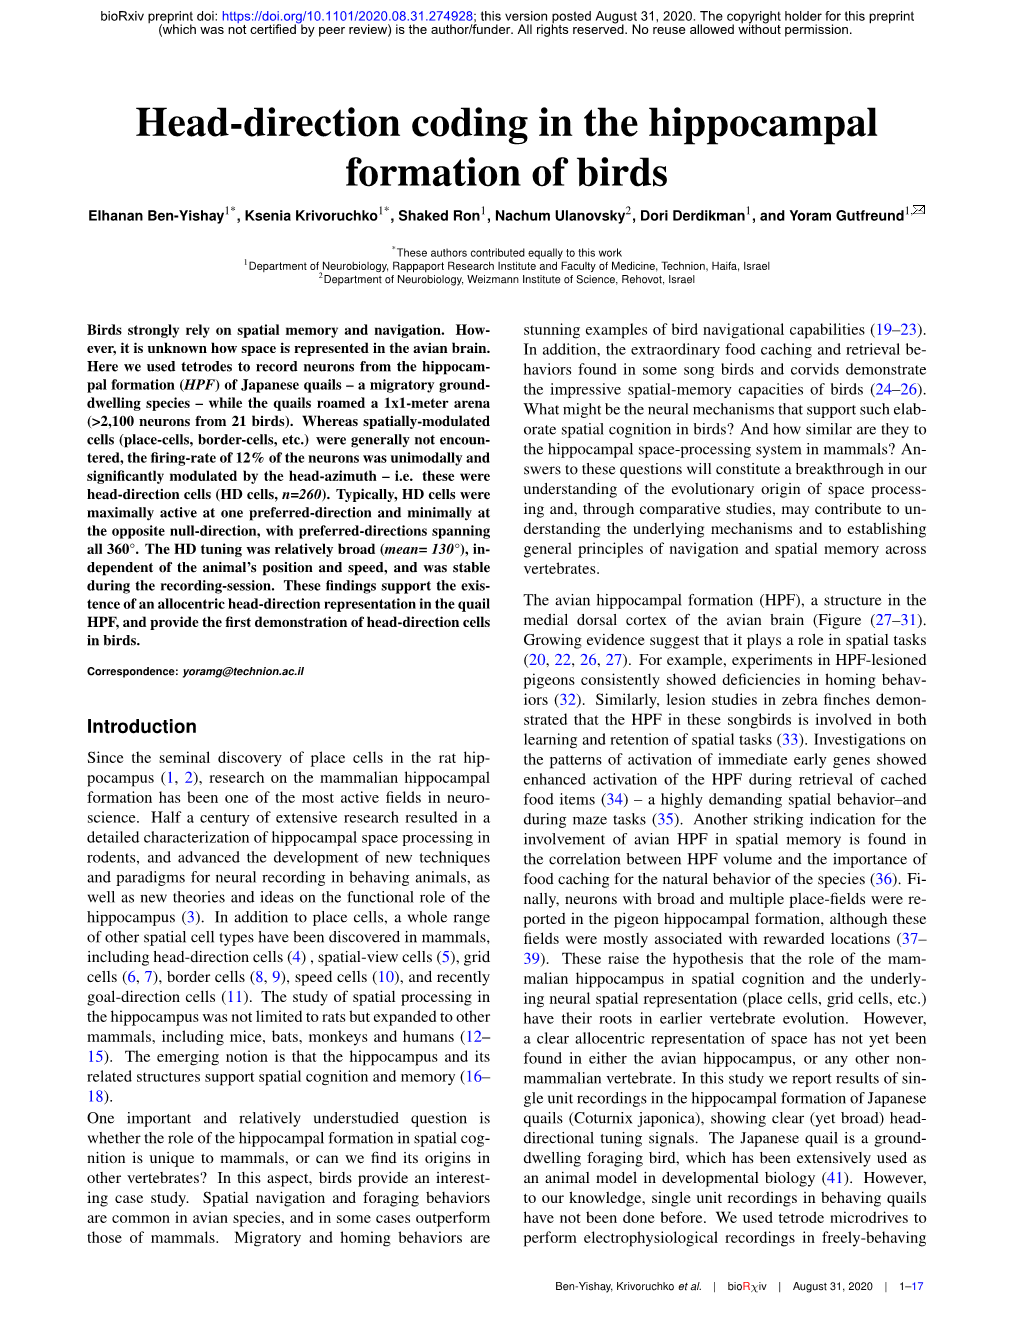 Head-Direction Coding in the Hippocampal Formation of Birds